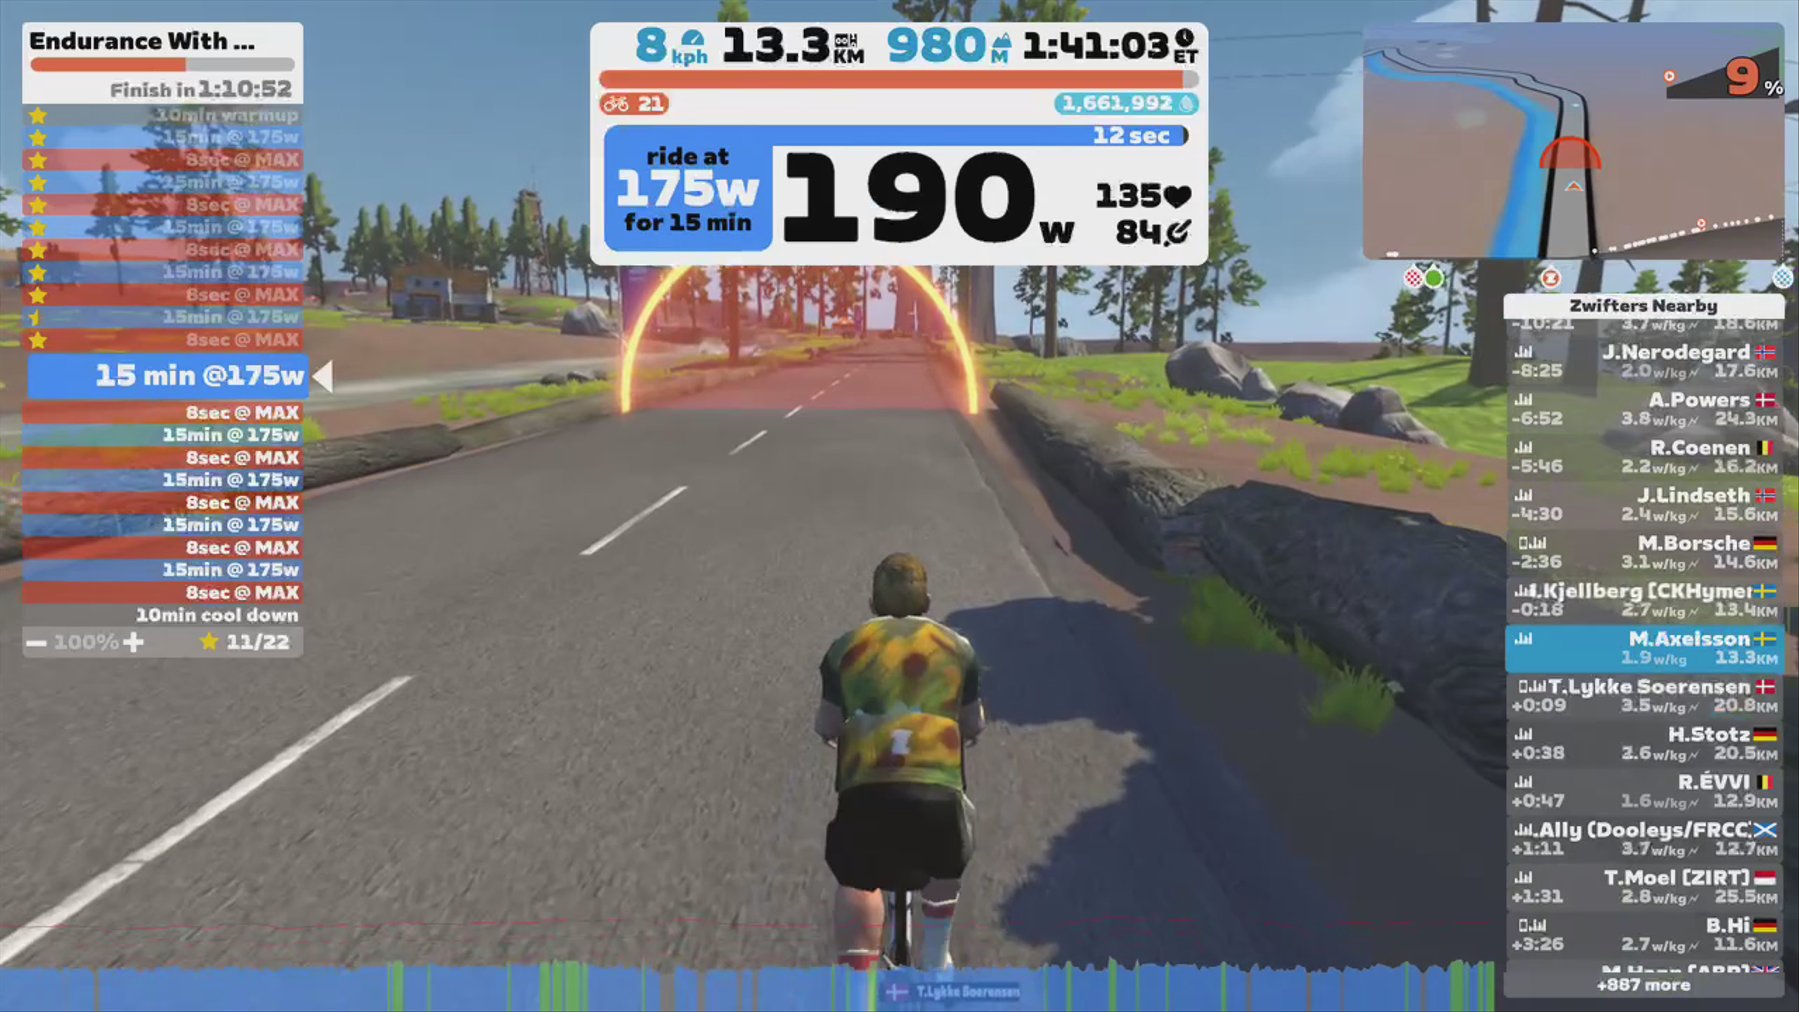 Zwift - Endurance With Max Sprints in France